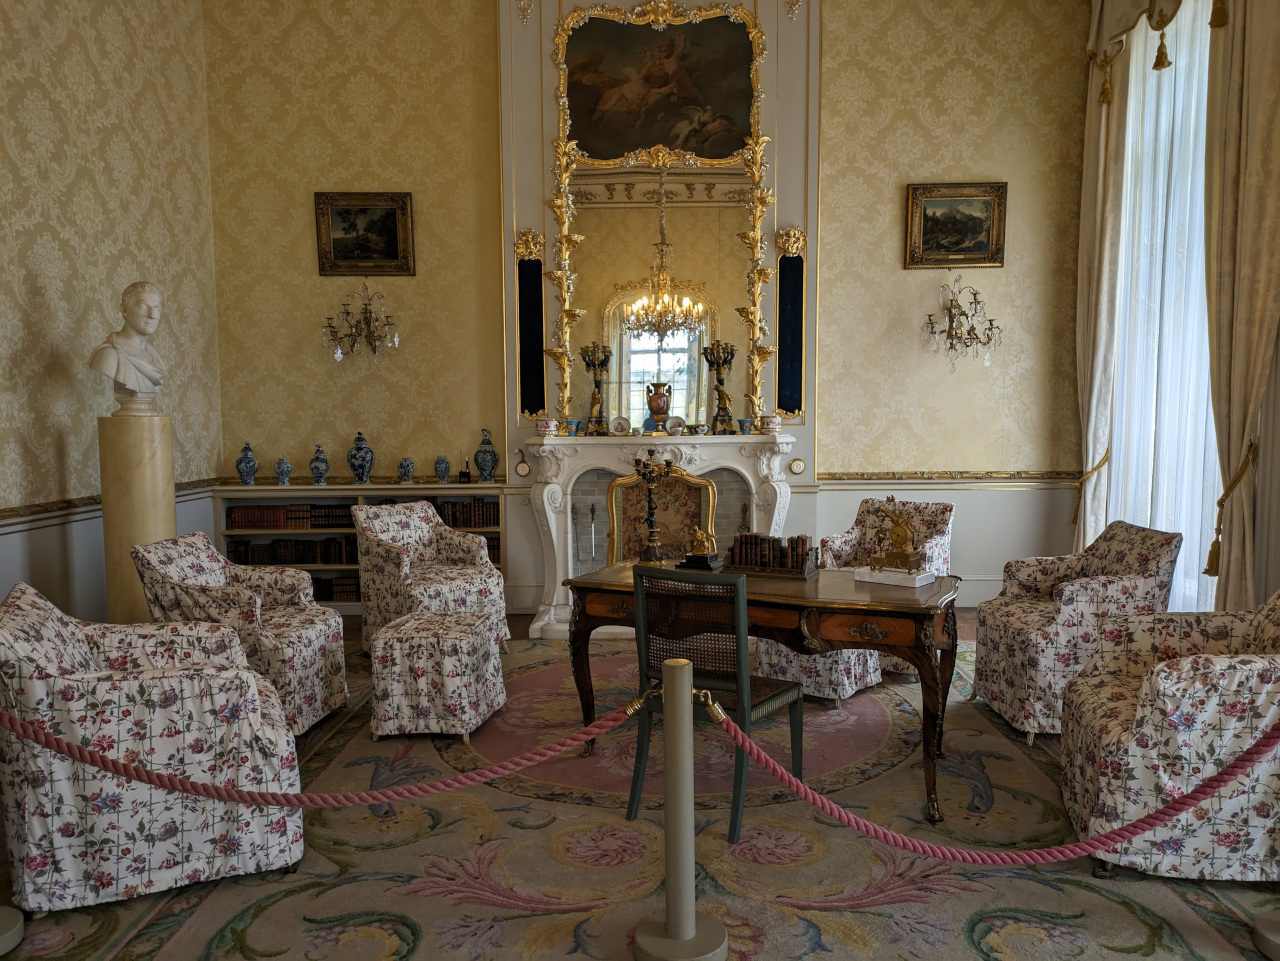 Old furniture with old table, head statue and bookshelf within the Countess sitting room